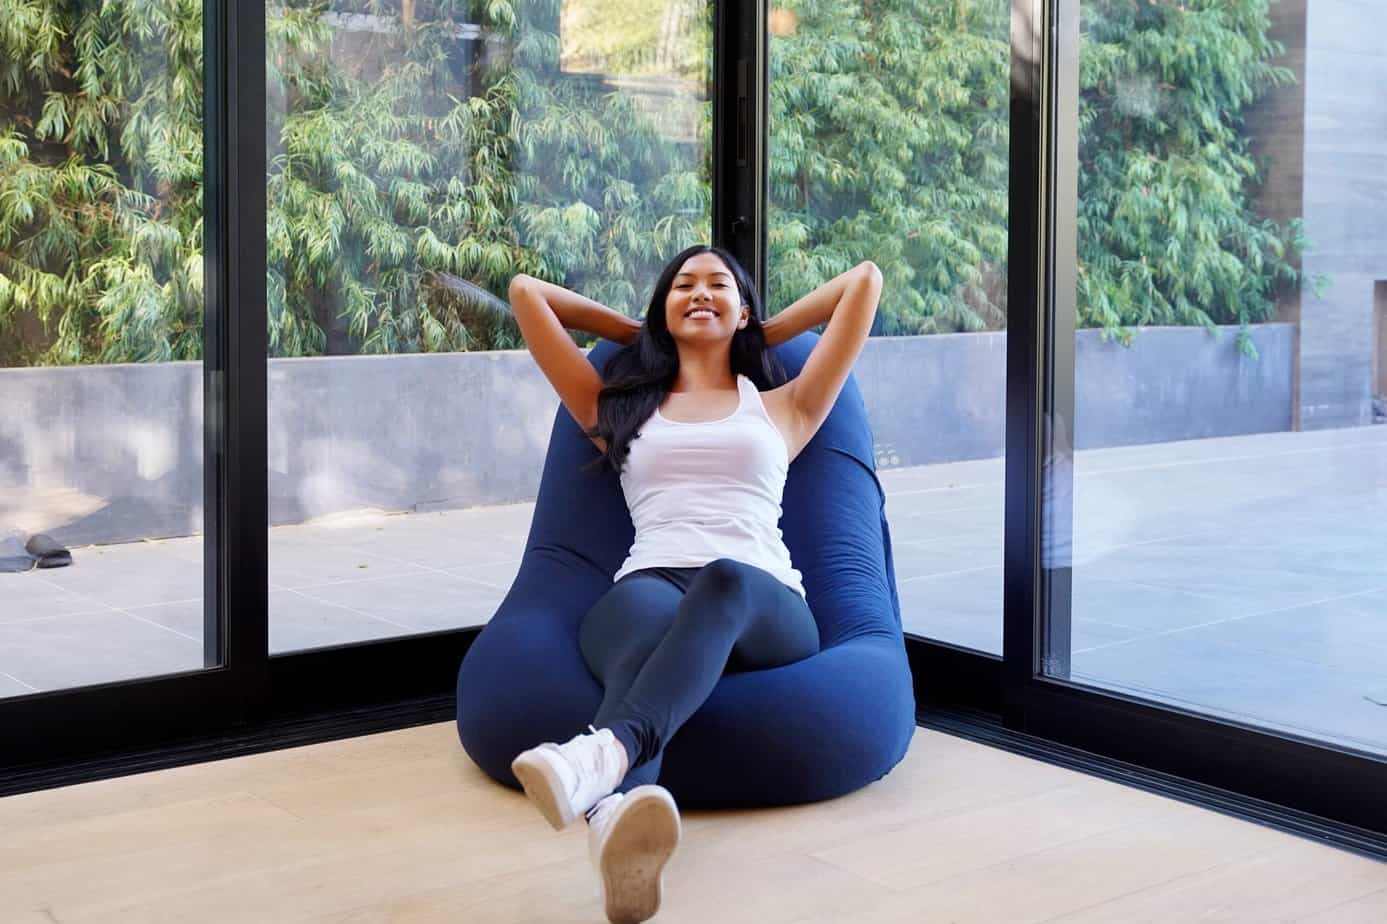 Moon Pod vs Lovesac: Which Bean Bag Chair is Right for You?, by Deala